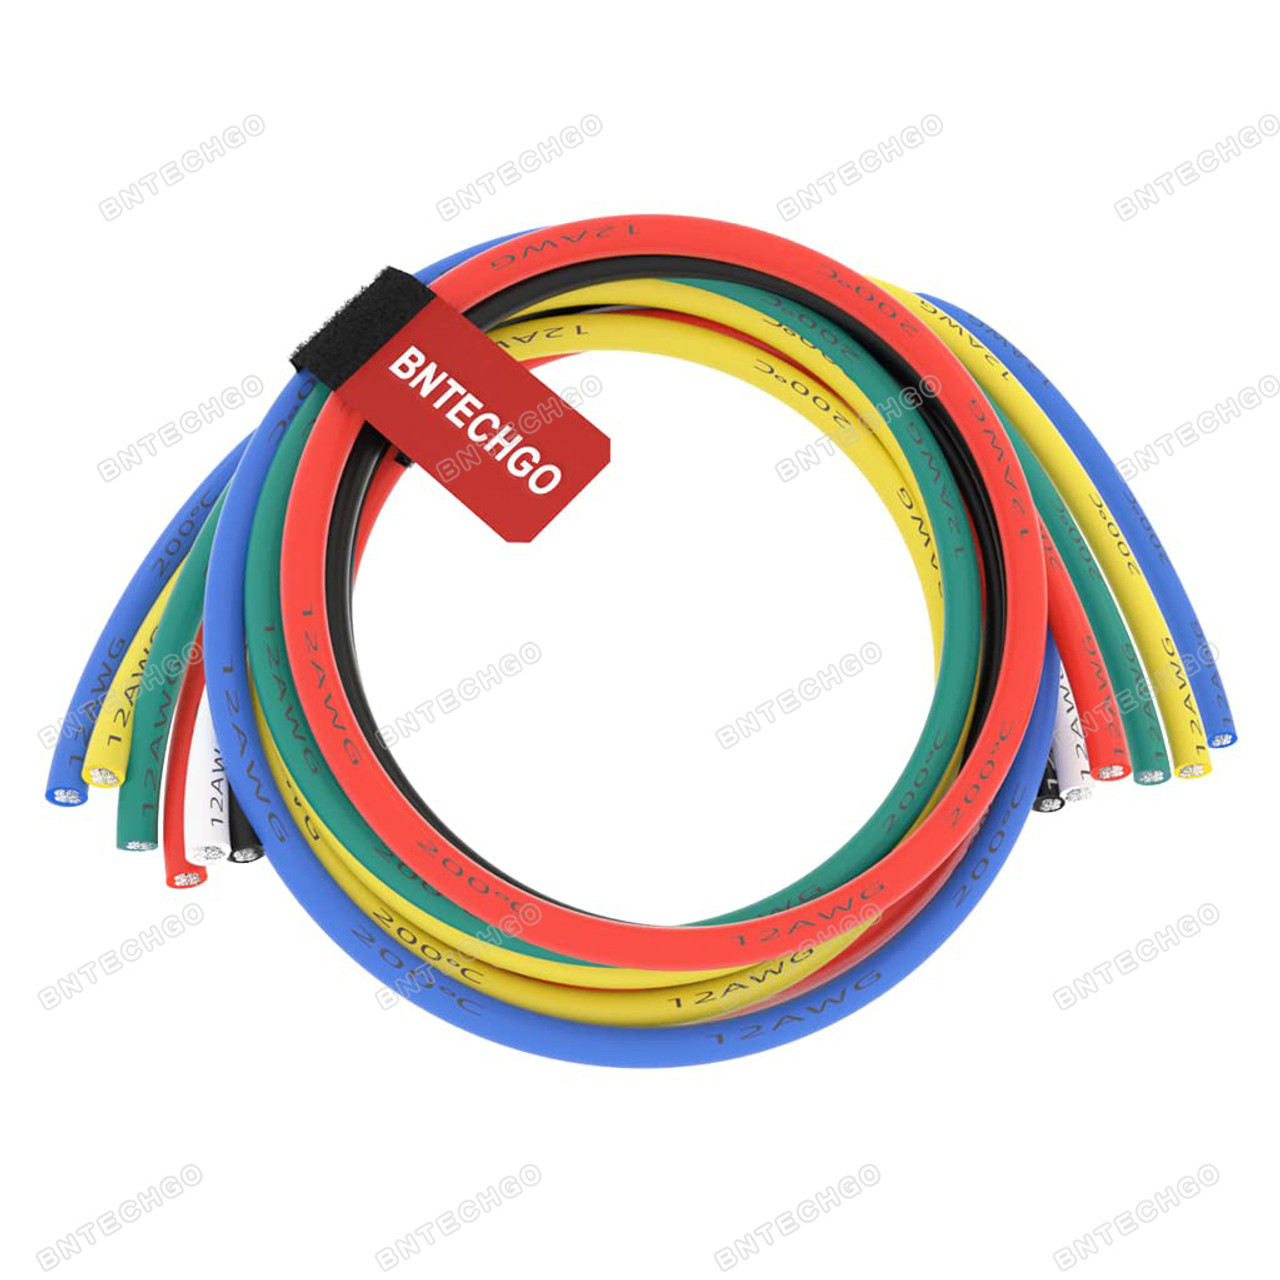 BNTECHGO 10 Gauge Silicone Wire Ultra Flexible 200 Feet(Black and Red Each  Color 100 ft) High Temp 200 deg C 600V 10 AWG Stranded Tinned Copper Wire